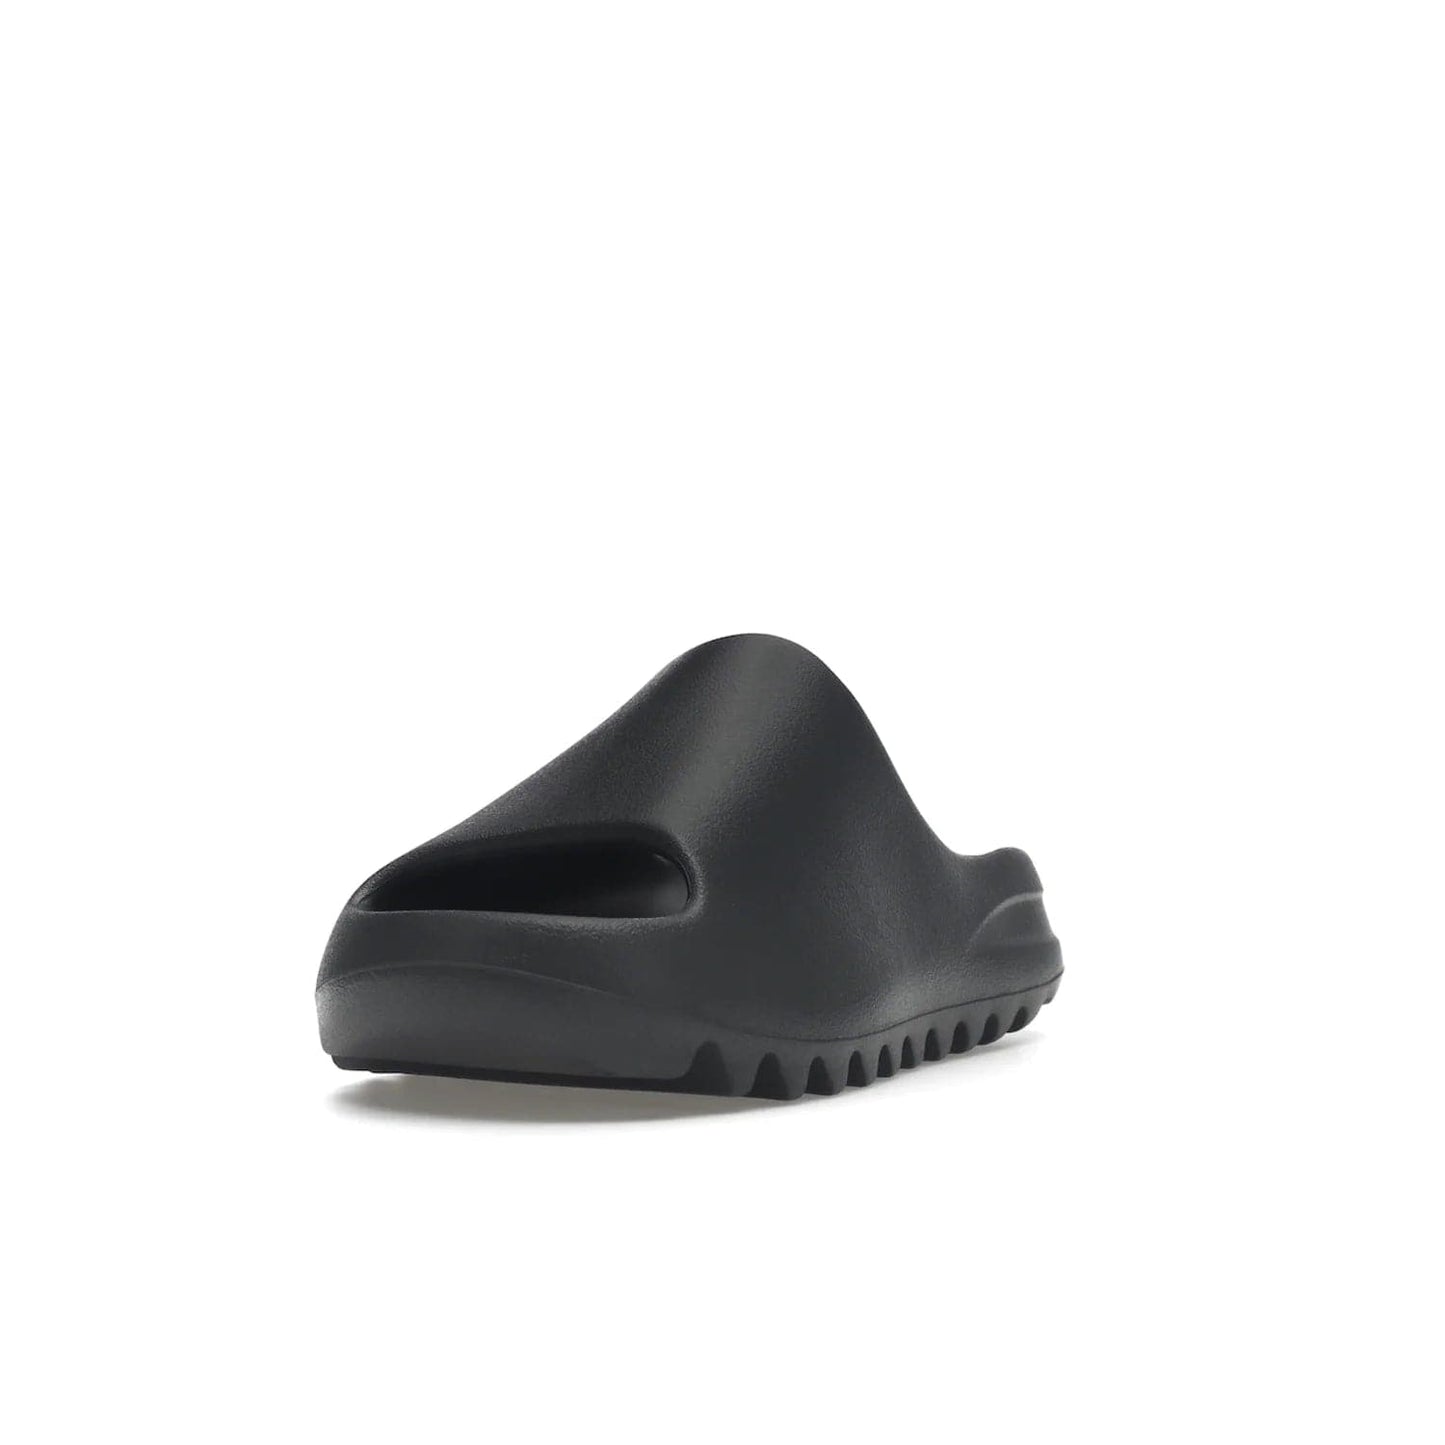 adidas Yeezy Slide Slate Grey - Image 13 - Only at www.BallersClubKickz.com - Stylish & comfortable adidas Yeezy Slide Slate Grey features an EVA foam upper, strategic cutouts, textured outsole pattern, & easy slip-on design for modern comfort & classic style.